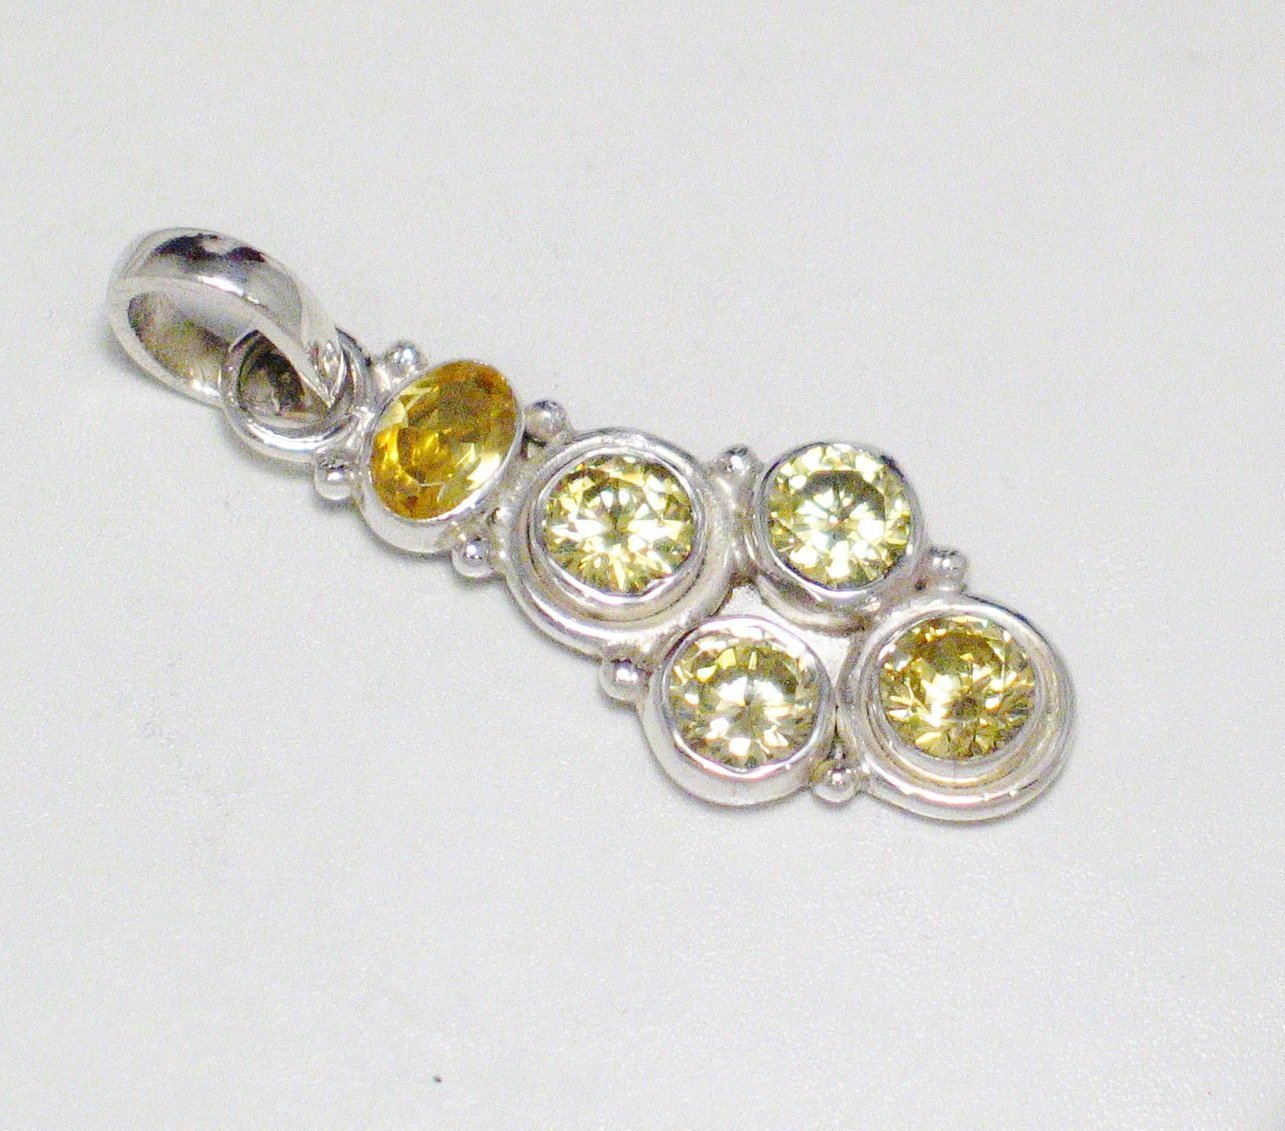 Silver Pendants | Shimmery Canary Yellow Shifting Cubic Zirconia Pendant | Overstock Jewelry online Blingschlingers.com